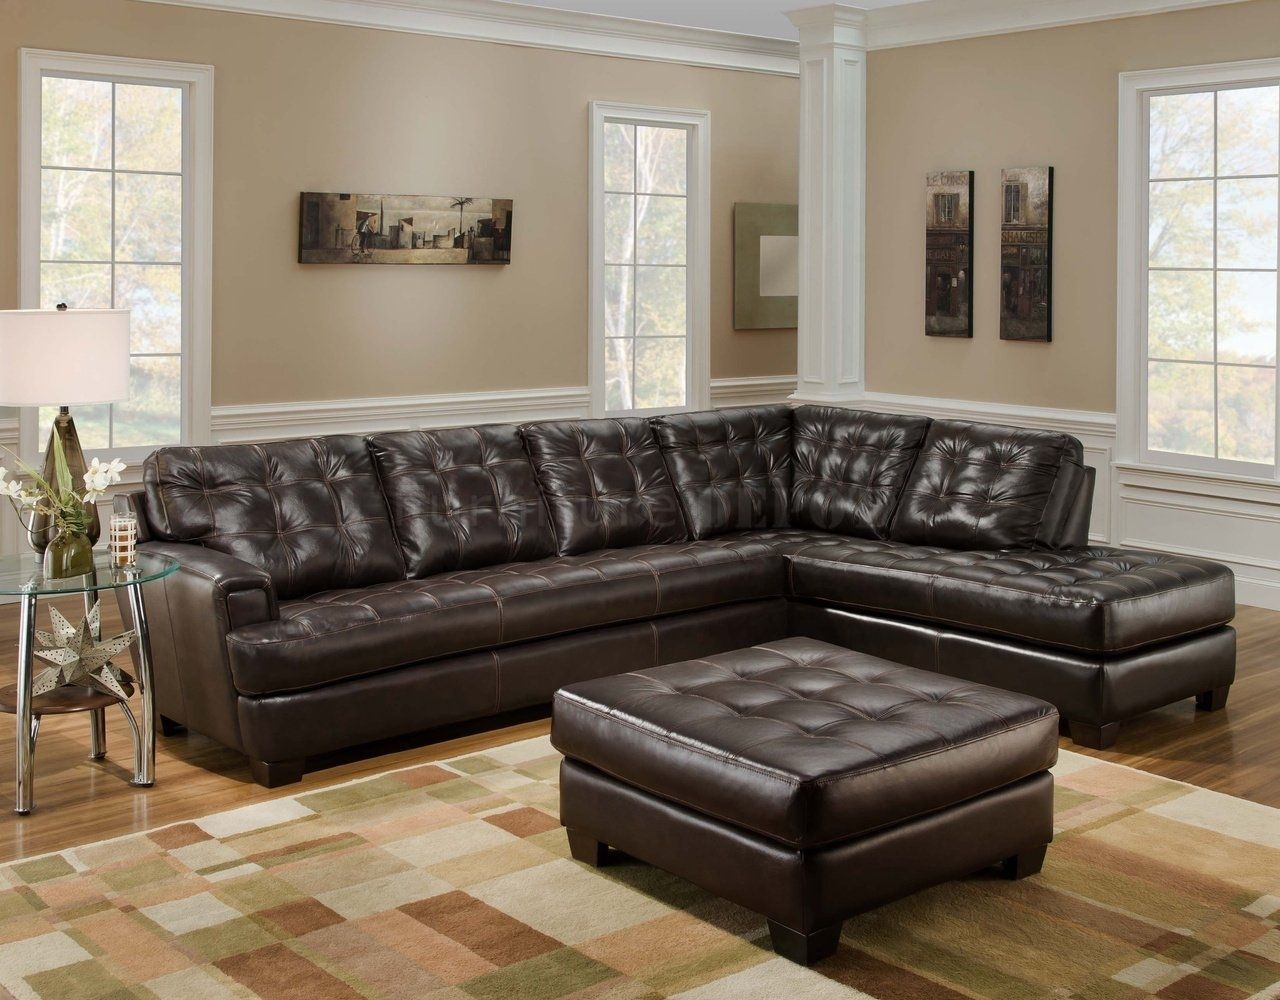 Sectional Sofa Design: Awesome Leather Sectional Sleeper Sofa Within Leather Sectionals With Chaise And Ottoman (Photo 2 of 15)